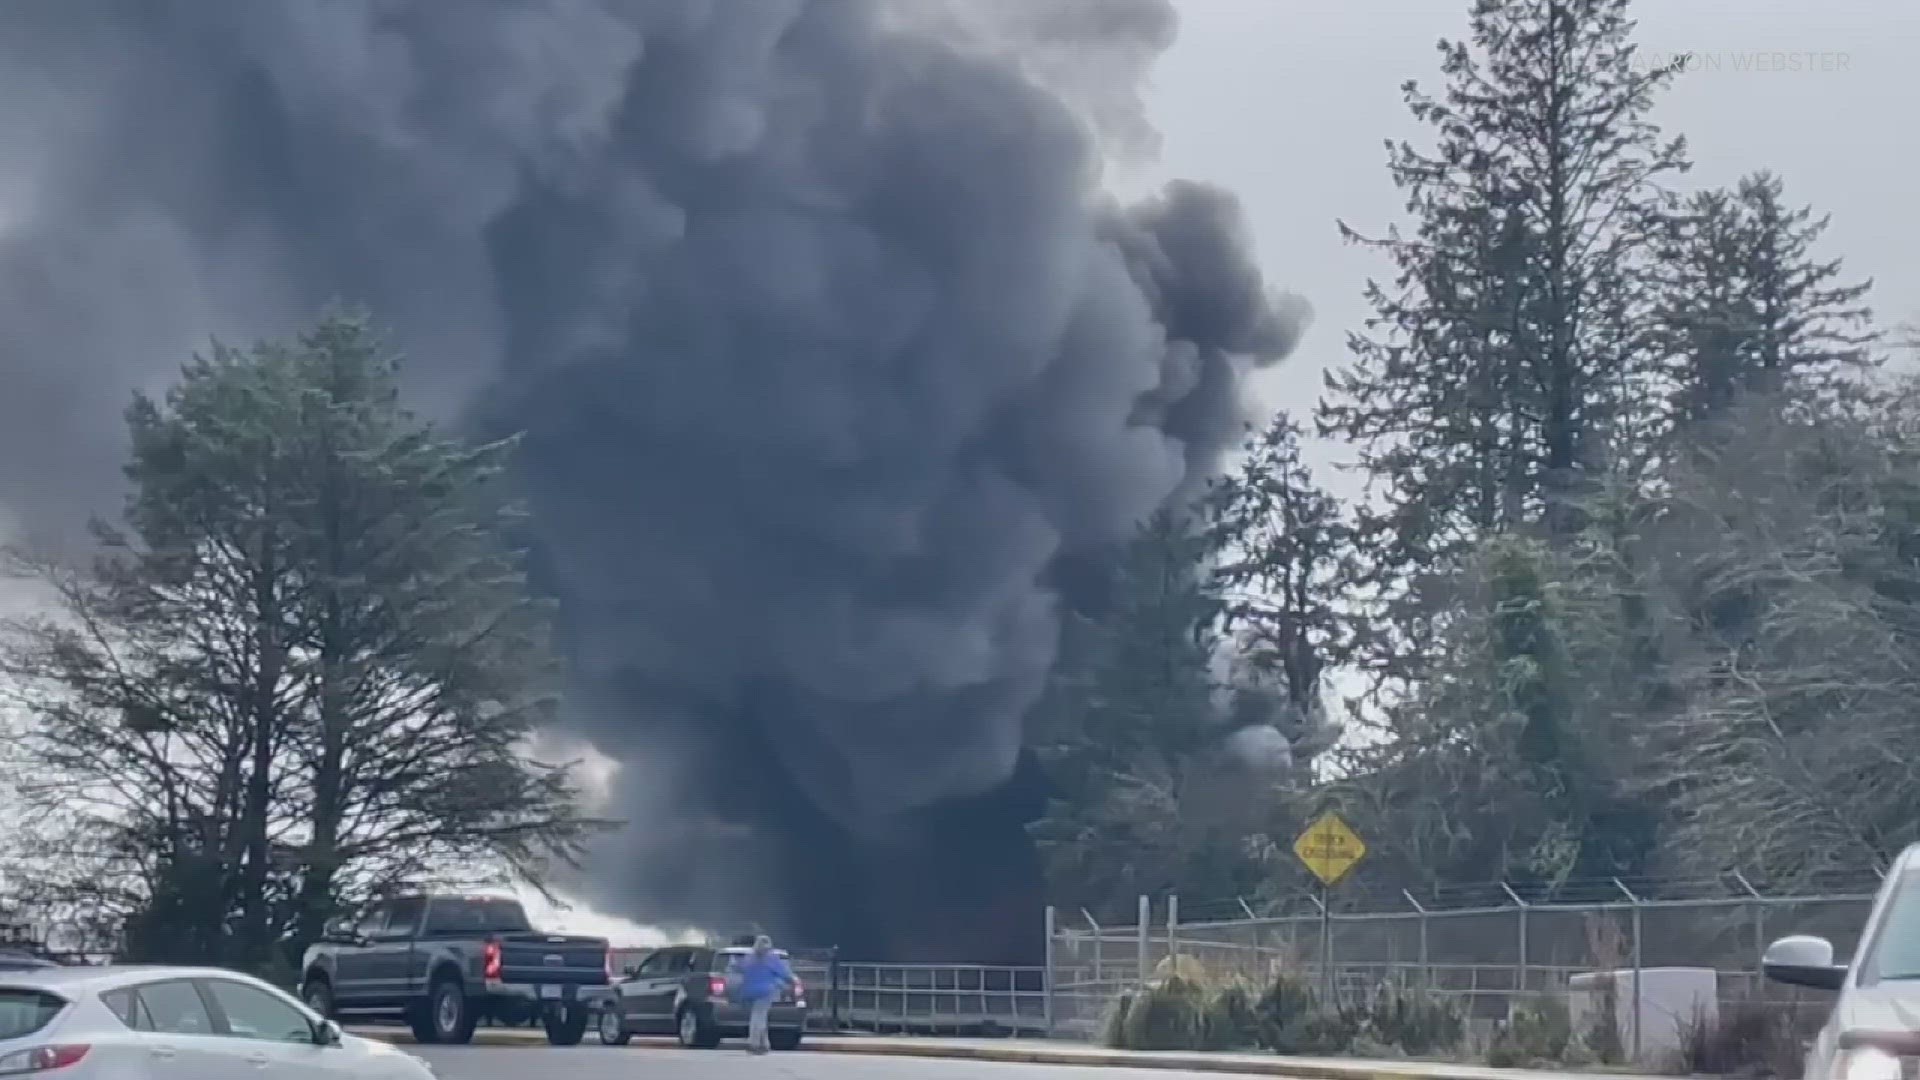 Crews are battling a fire at the Port of Ilwaco that sent plumes of black, hazardous smoke into the air.